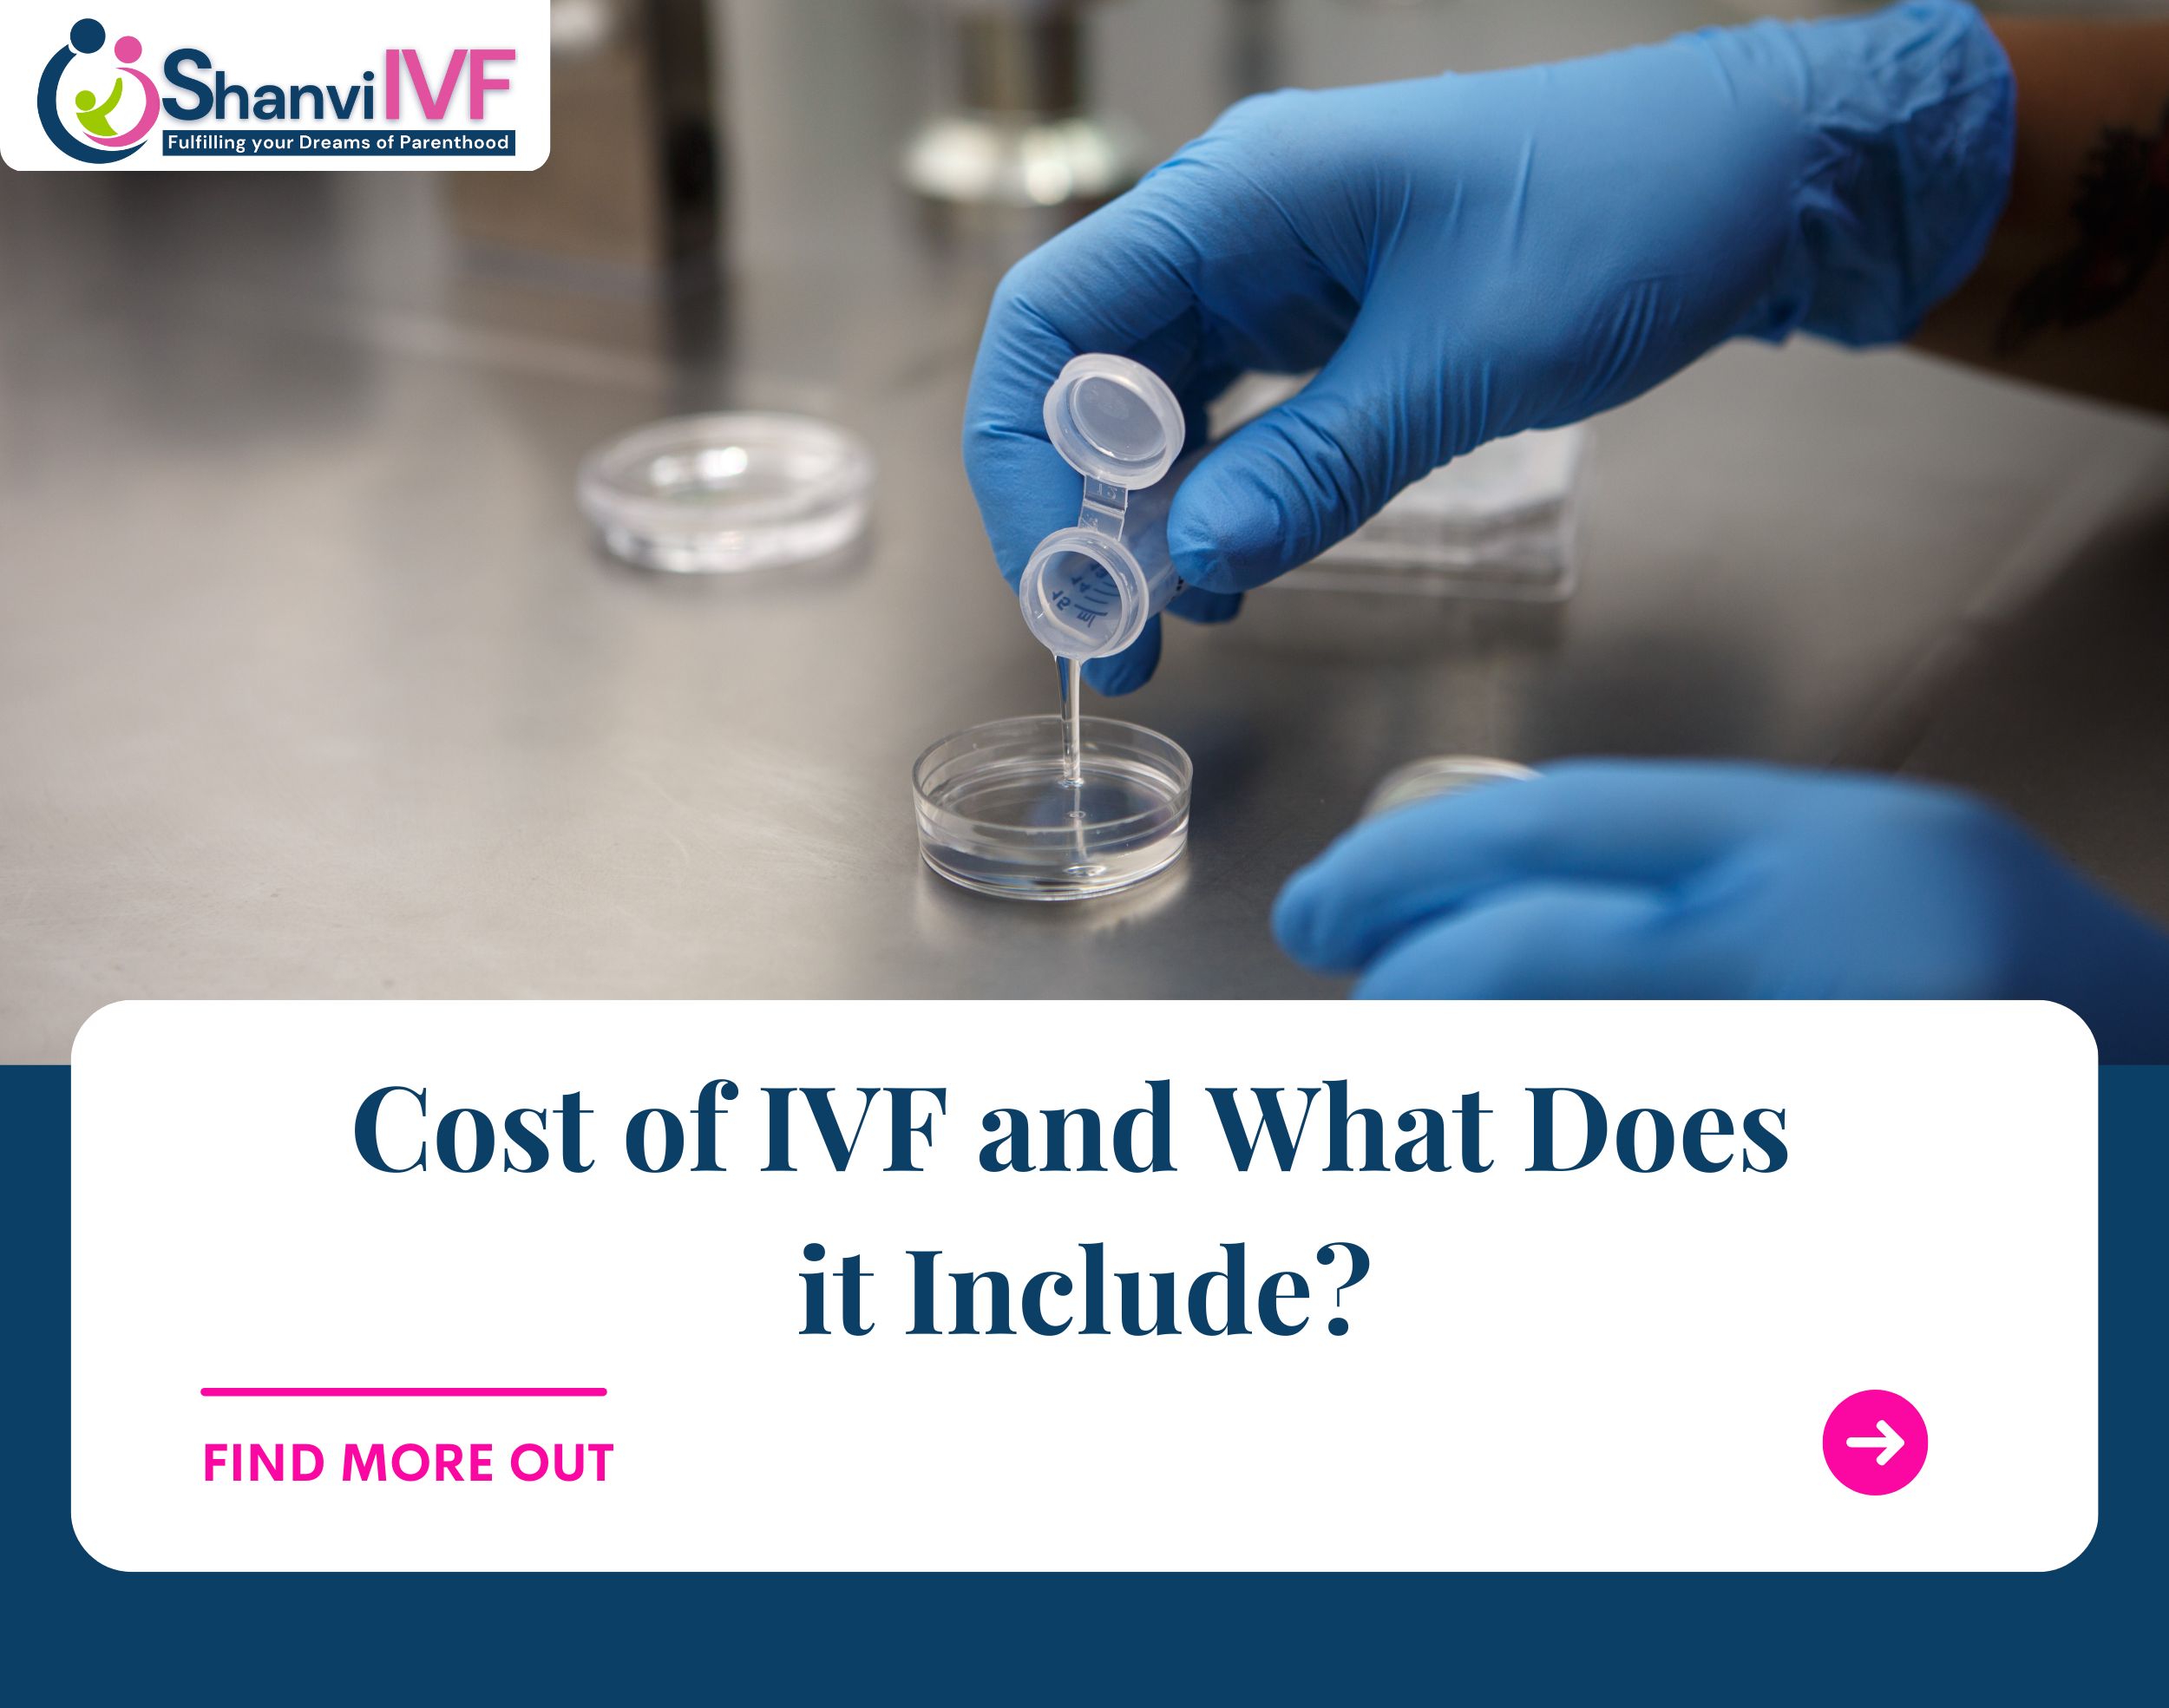 Cost of IVF and What Does it Include?